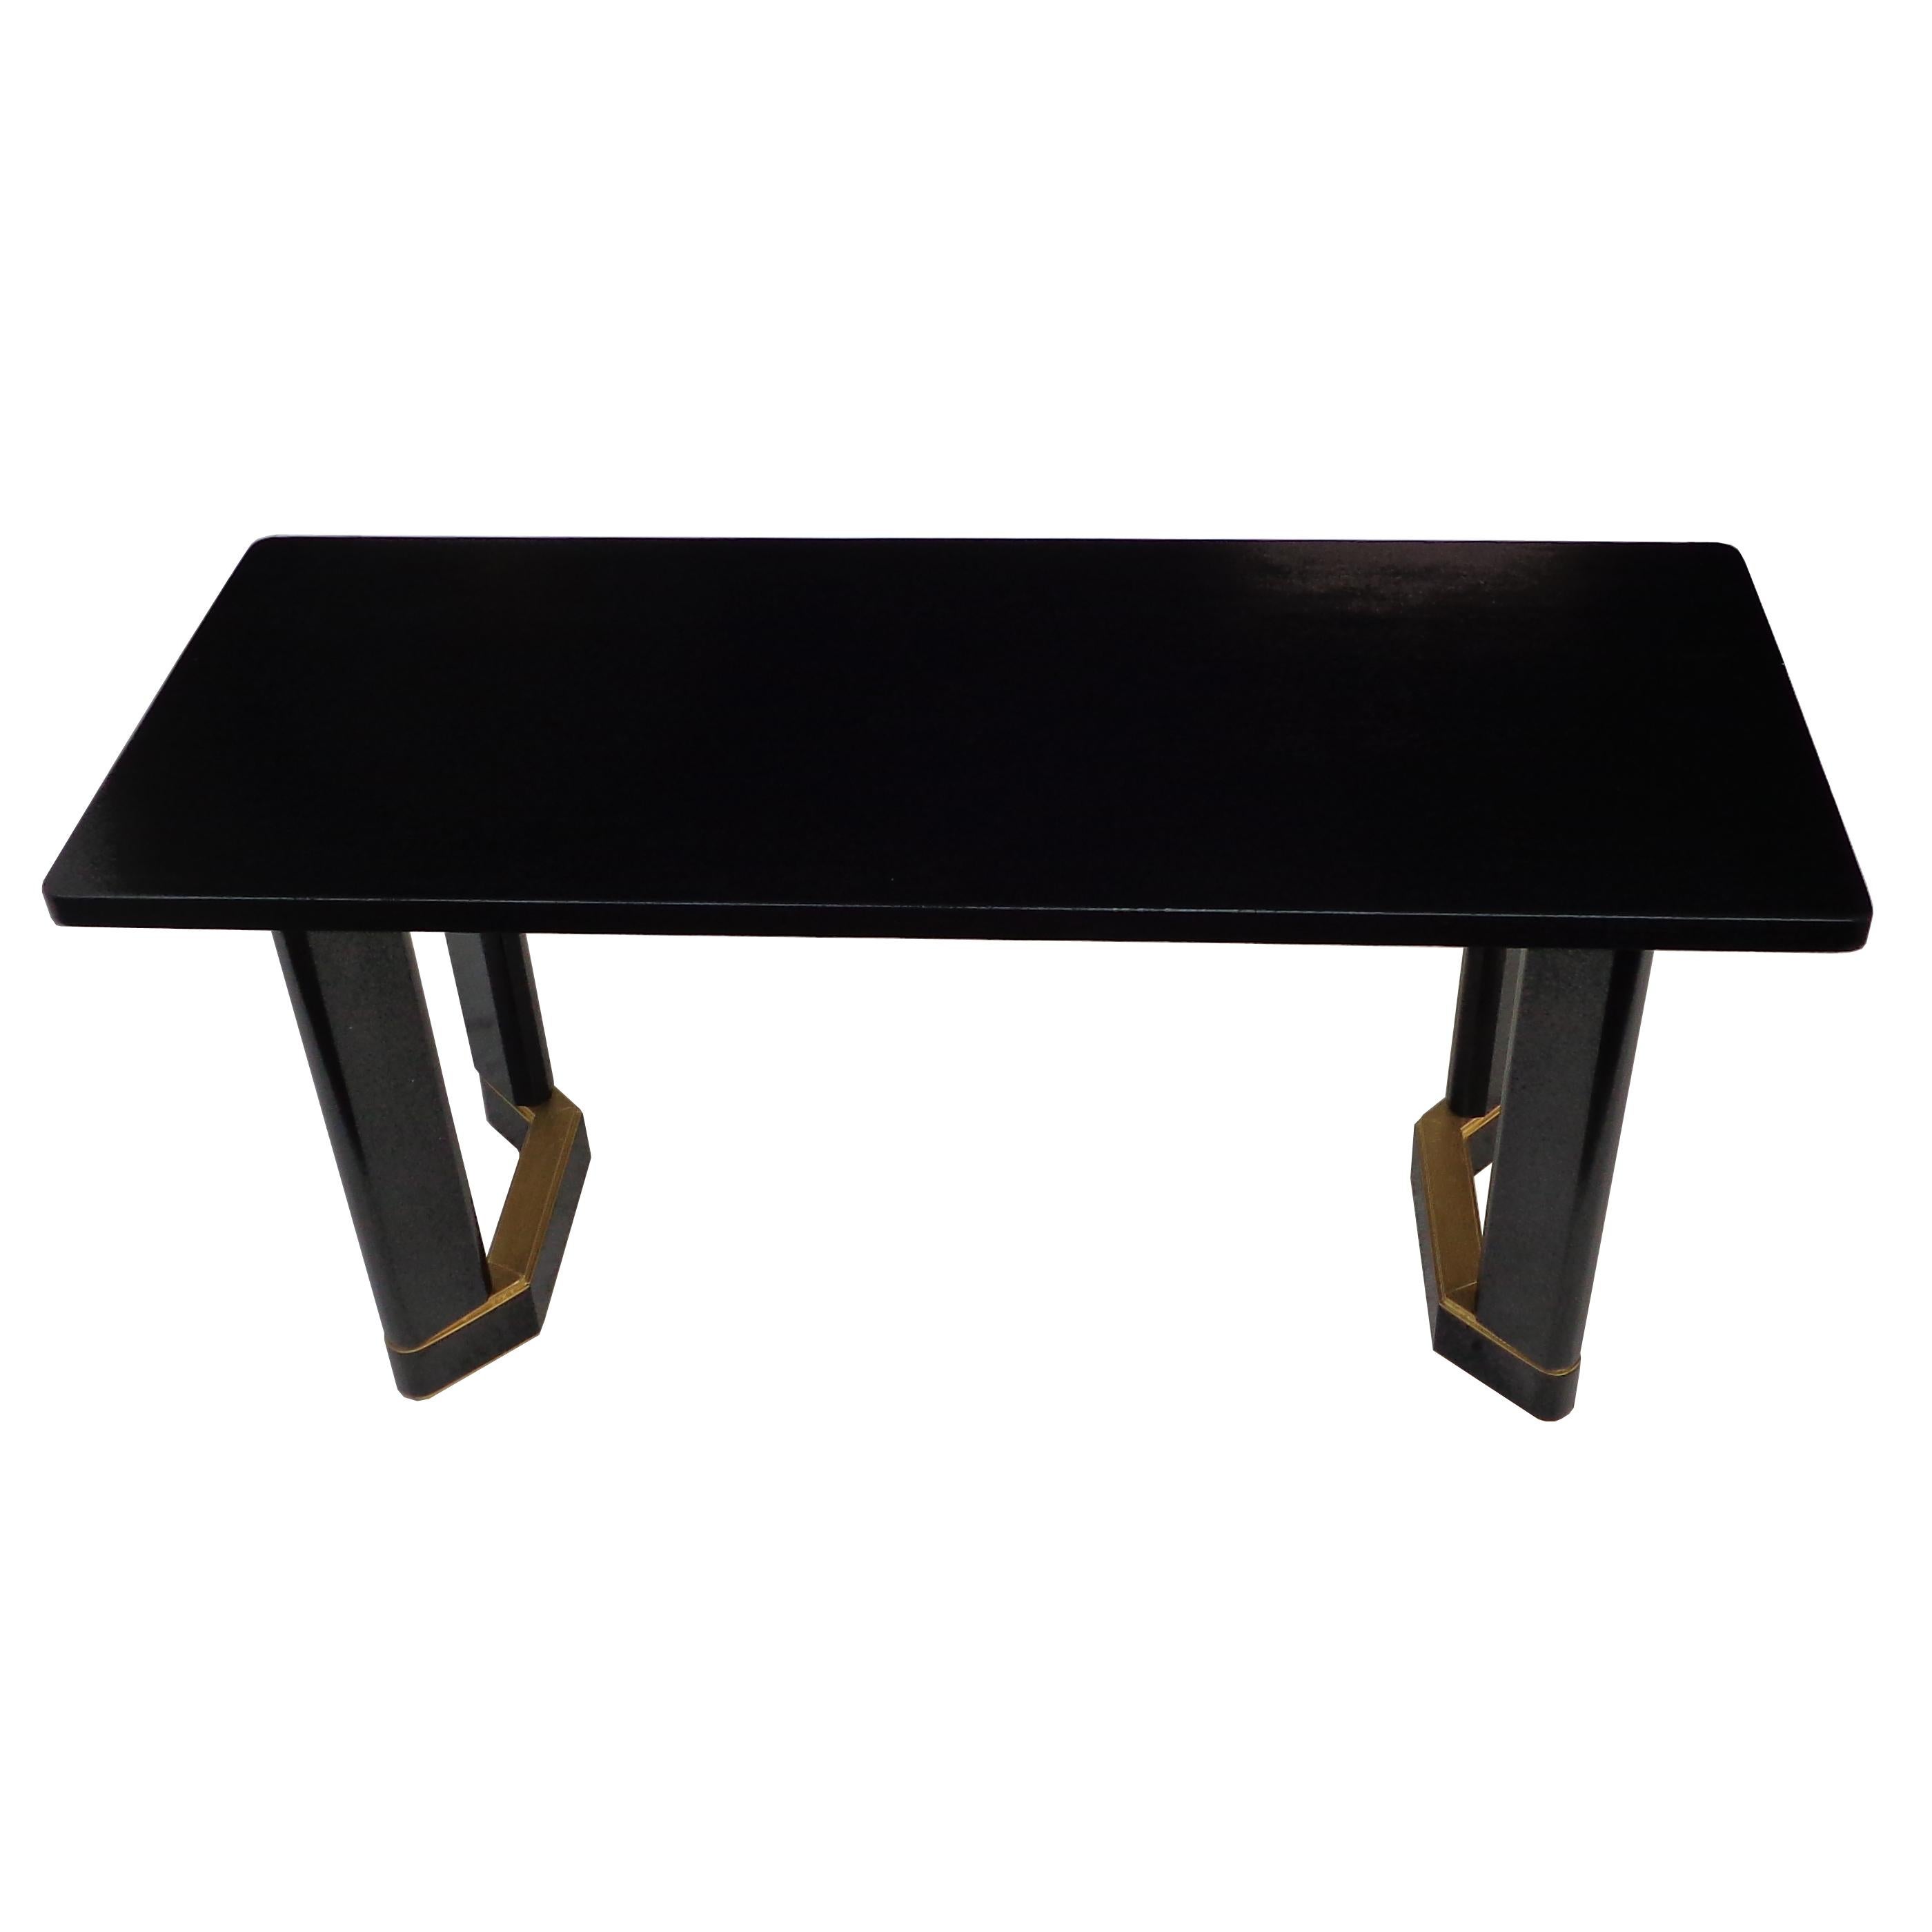 Art Deco style writing or console table

Simple and elegant ebonized table with gold leaf details on pedestal bases. 5Ft.

 